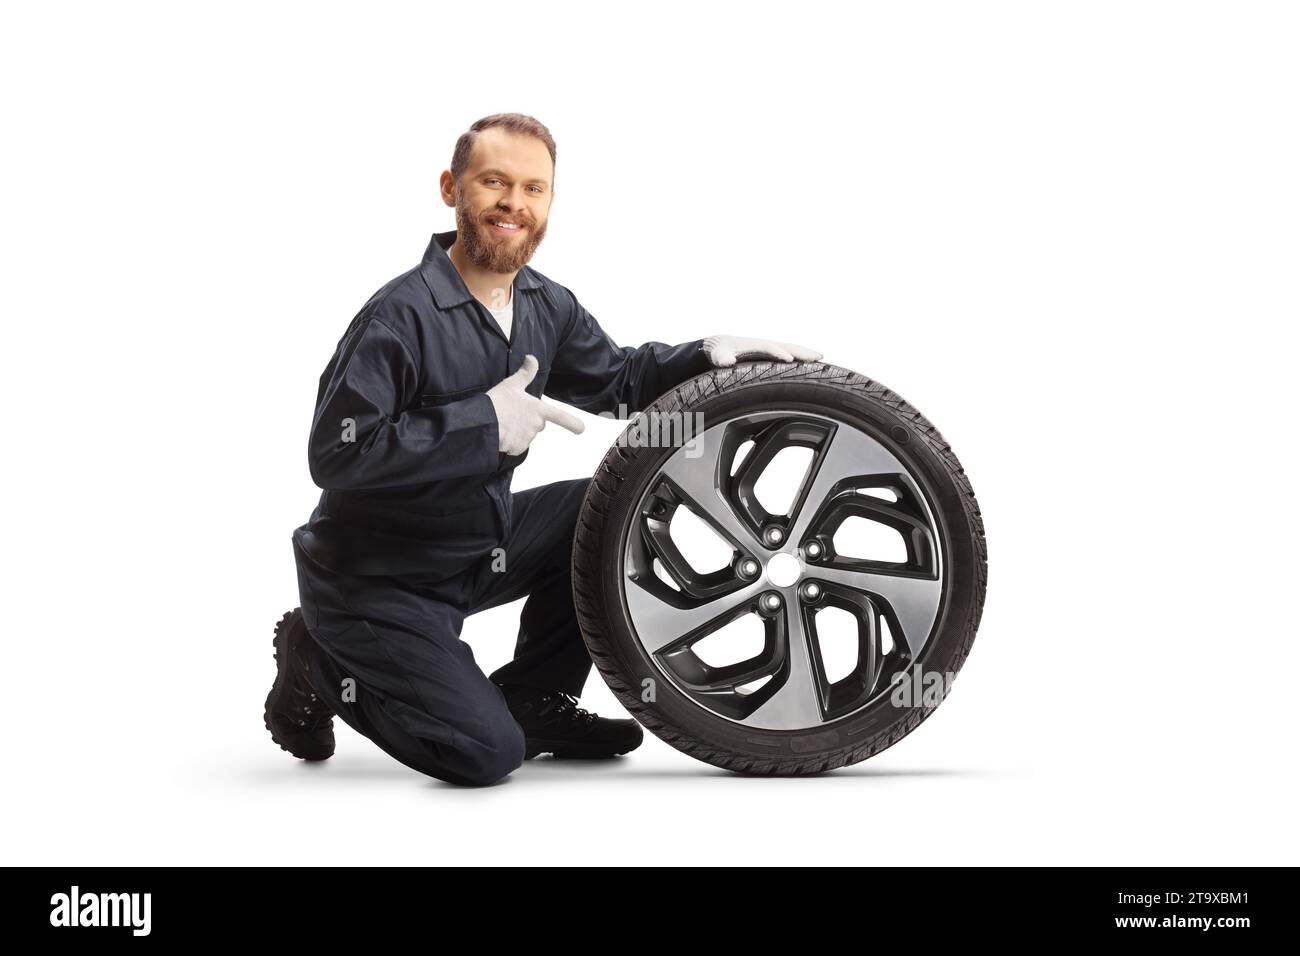 Car mechanic kneeling next to a tire and pointing isolated on white background Stock Photo